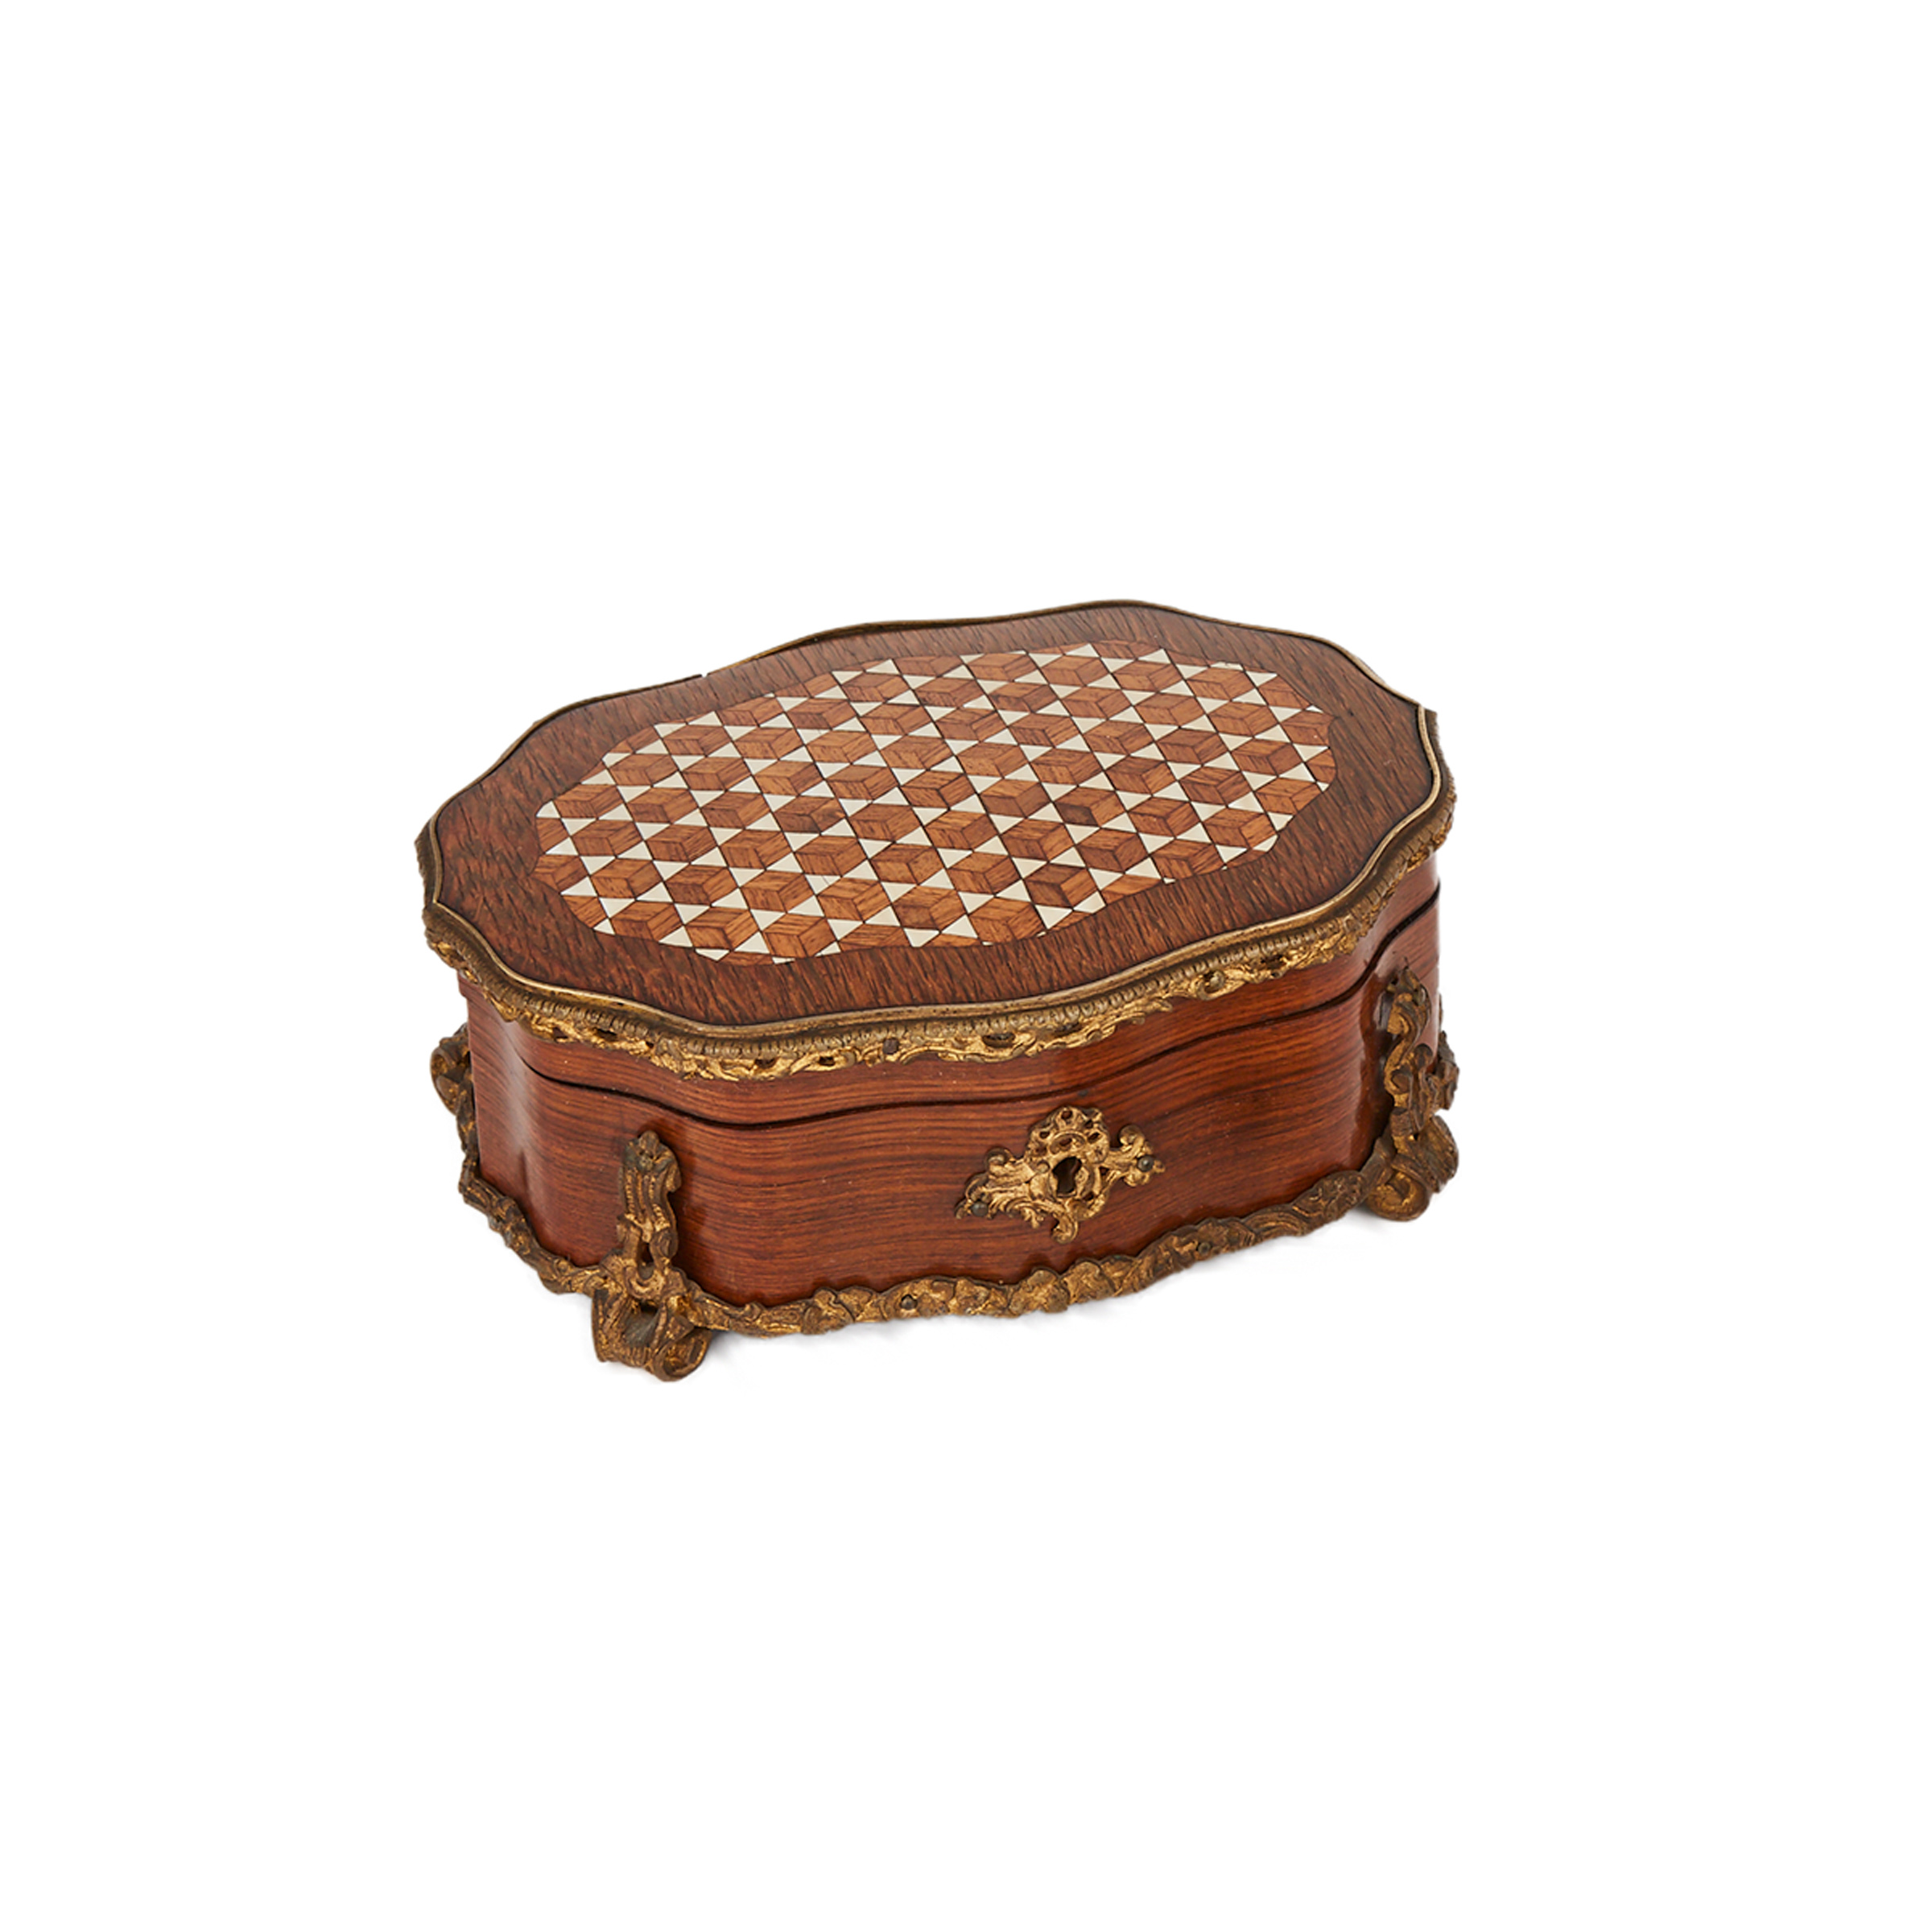 French Ormolu Mounted and Ivory Parquetry Inlaid Jewellery Casket, mid 19th century